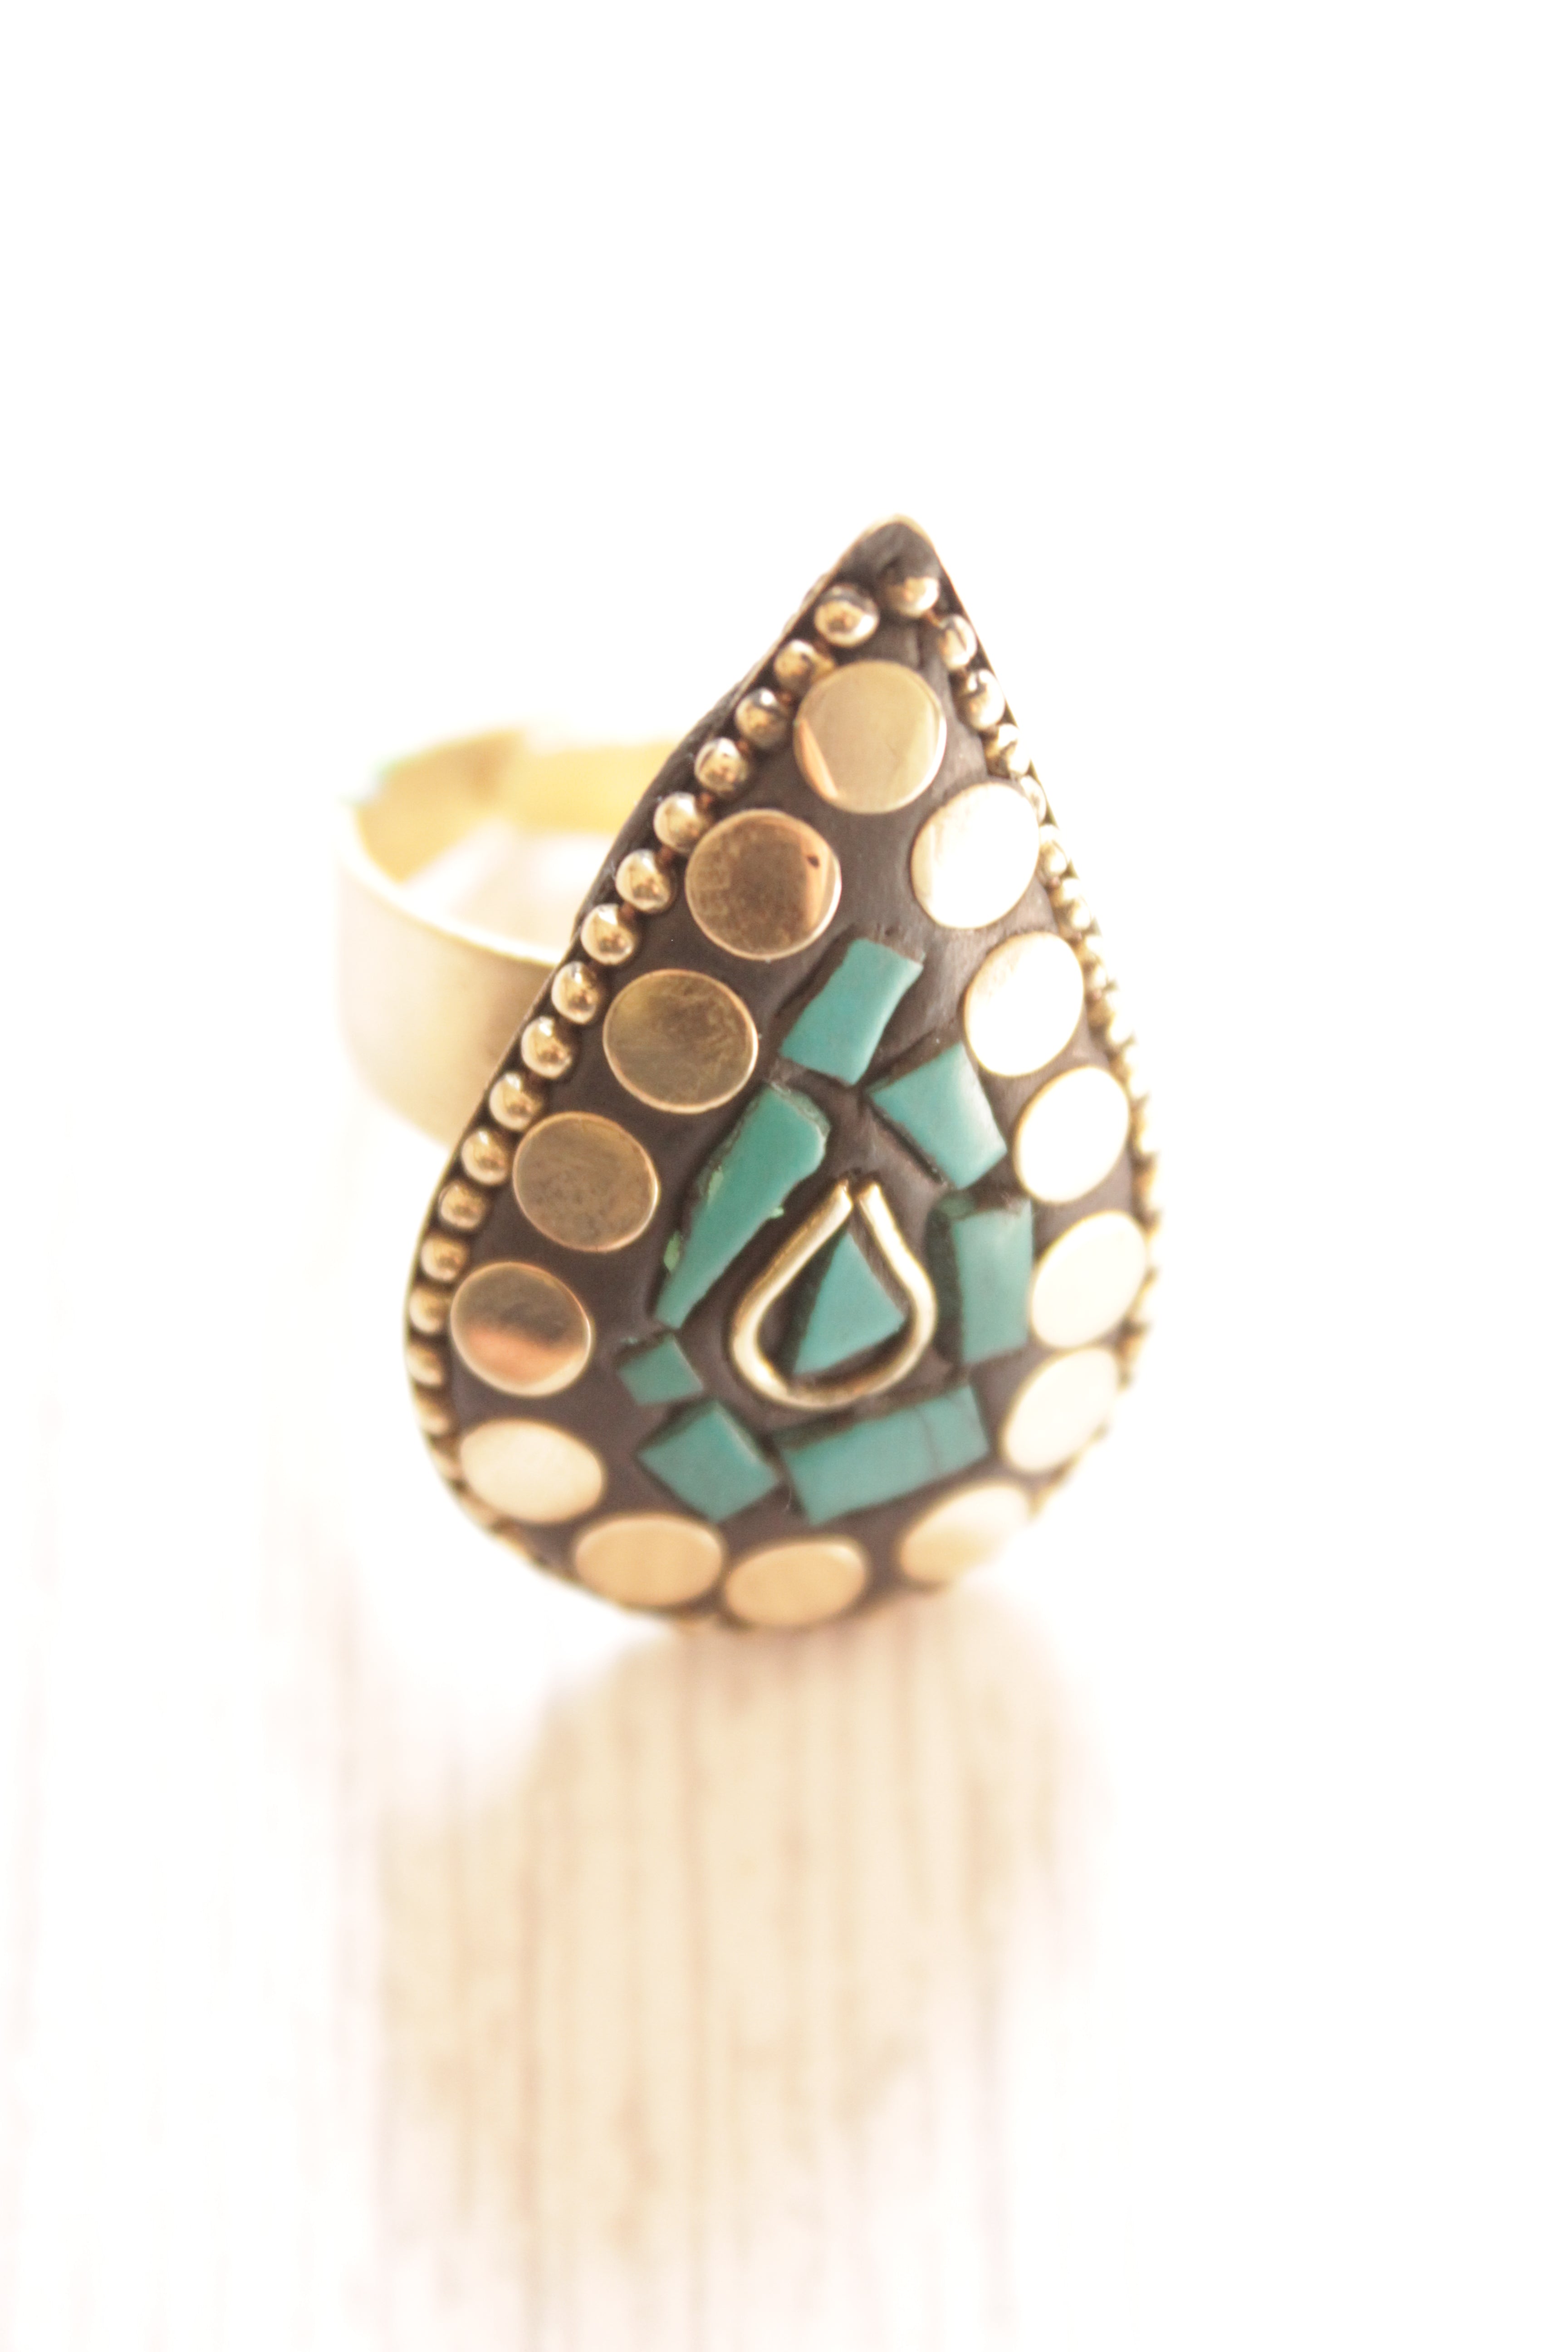 Tear Drop Shaped Statement Tibetan Adjustable Ring with Gold Accents